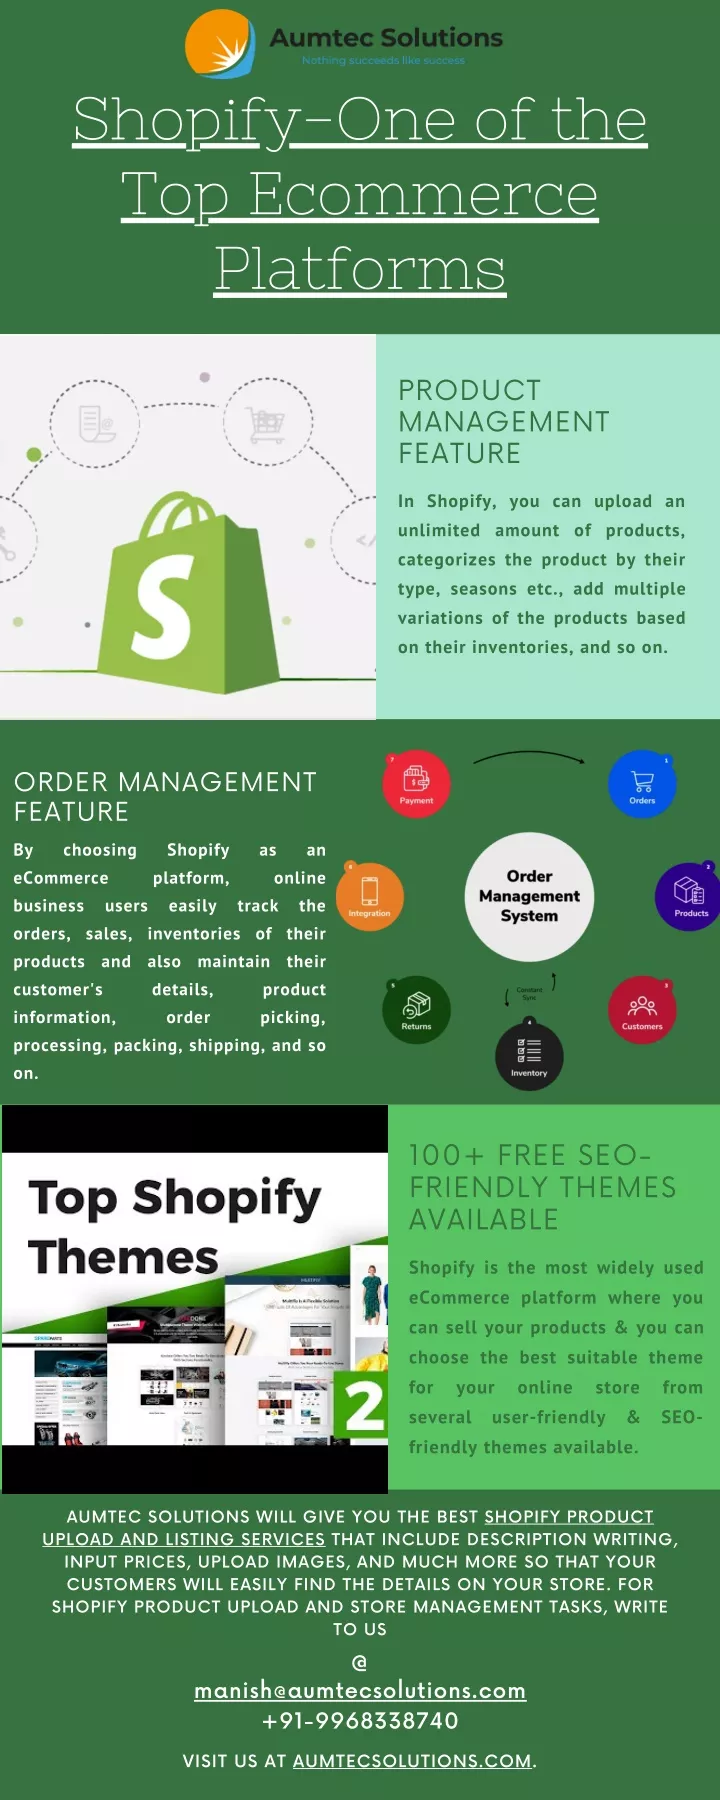 shopify one of the top ecommerce platforms